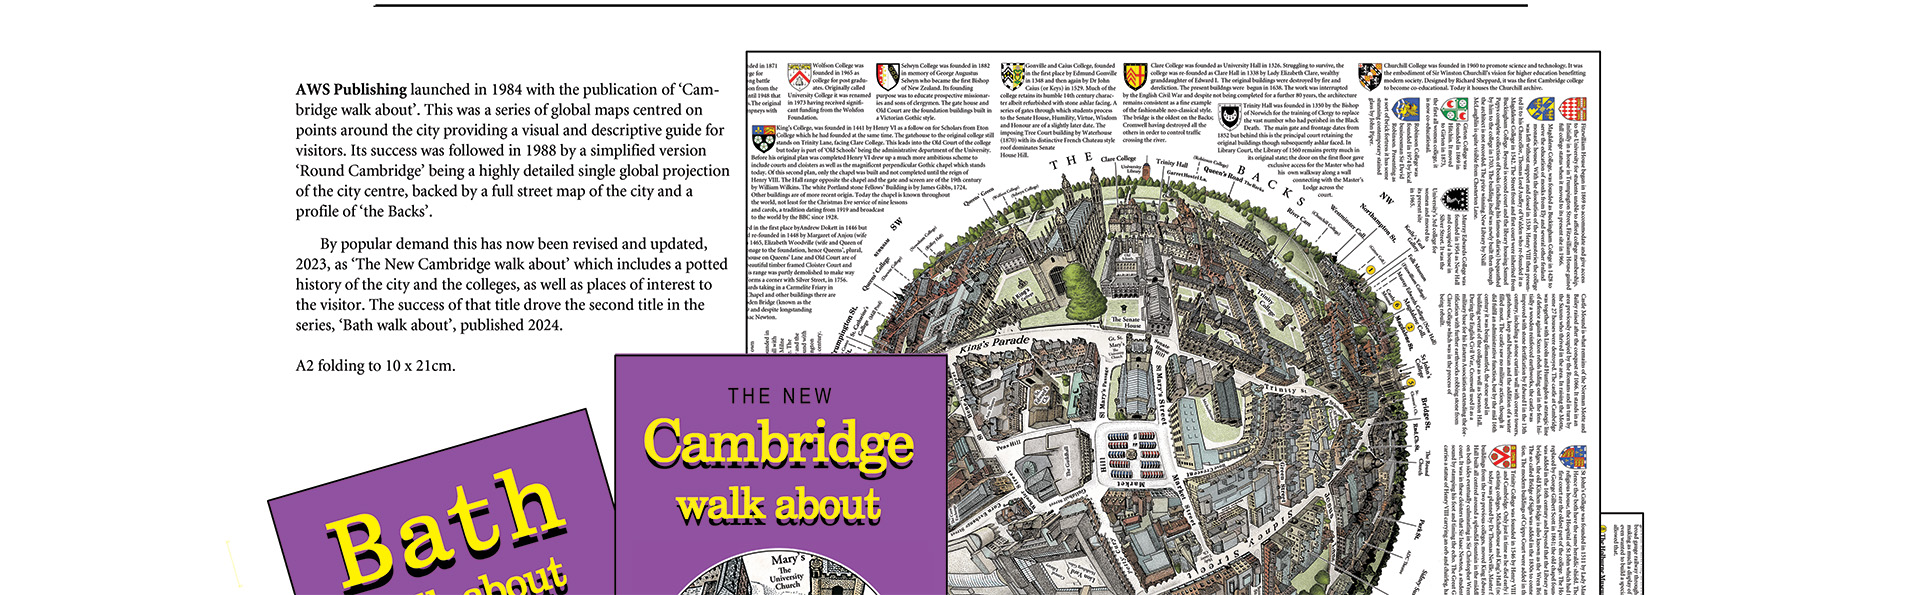 AWS Publishing launched in 1984 with the publication of ‘Cambridge walk about’. This was a series of global maps centred on points around the city providing a visual and descriptive guide for visitors. Its success was followed in 1988 by a simplified version ‘Round Cambridge’ being a highly detailed single global projection of the city centre, backed by a full street map of the city and a profile of ‘the Backs’.
		
		By popular demand this has now been revised and updated, 2023, as ‘The New Cambridge walk about’ which includes a potted history of the city and the colleges, as well as places of interest to the visitor. The success of that title drove the second title in the series, ‘Bath walk about’, published 2024.

A2 folding to 10 x 21cm.
